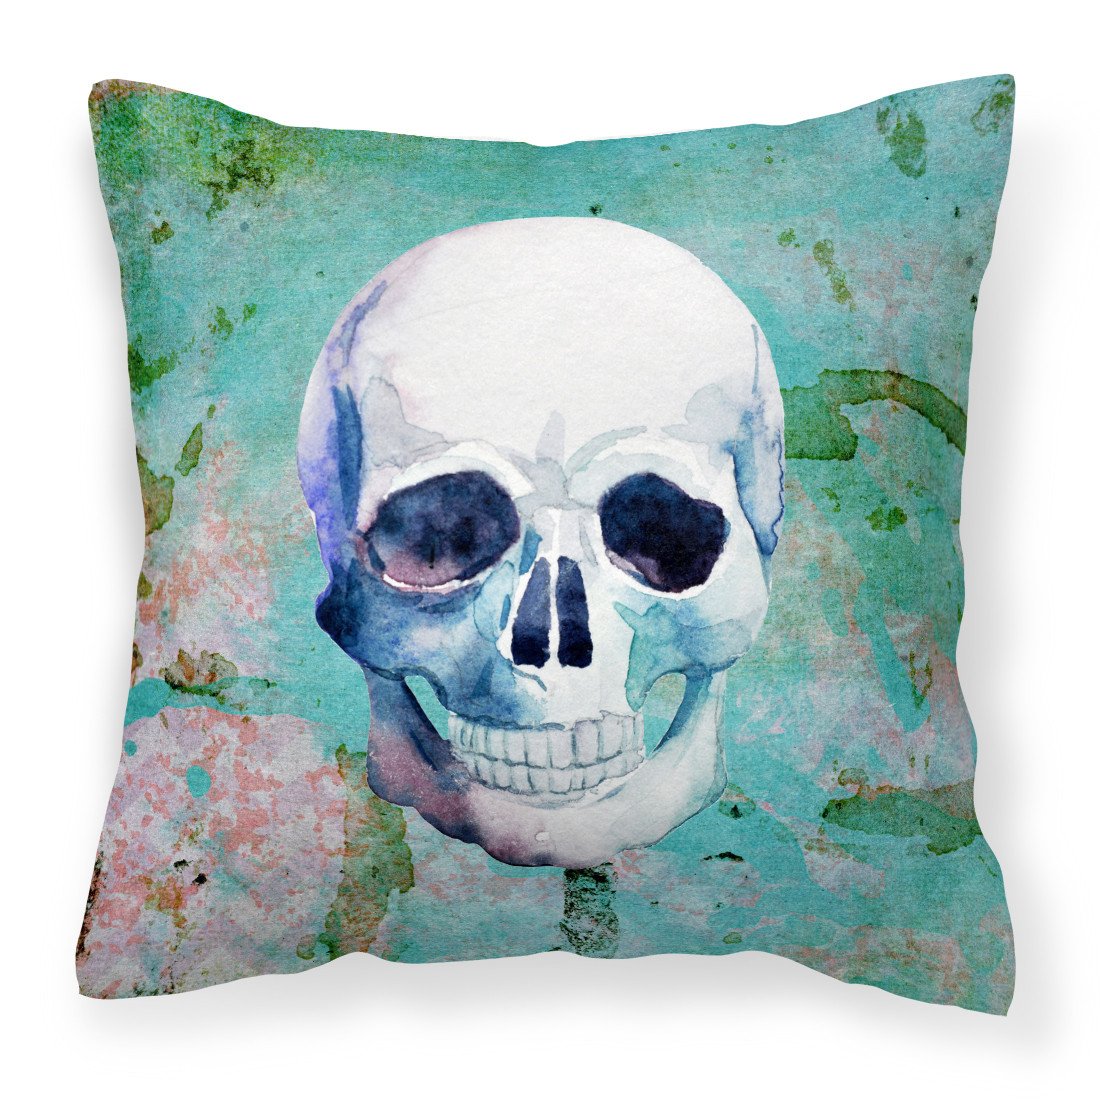 Day of the Dead Teal Skull Fabric Decorative Pillow BB5123PW1818 by Caroline's Treasures